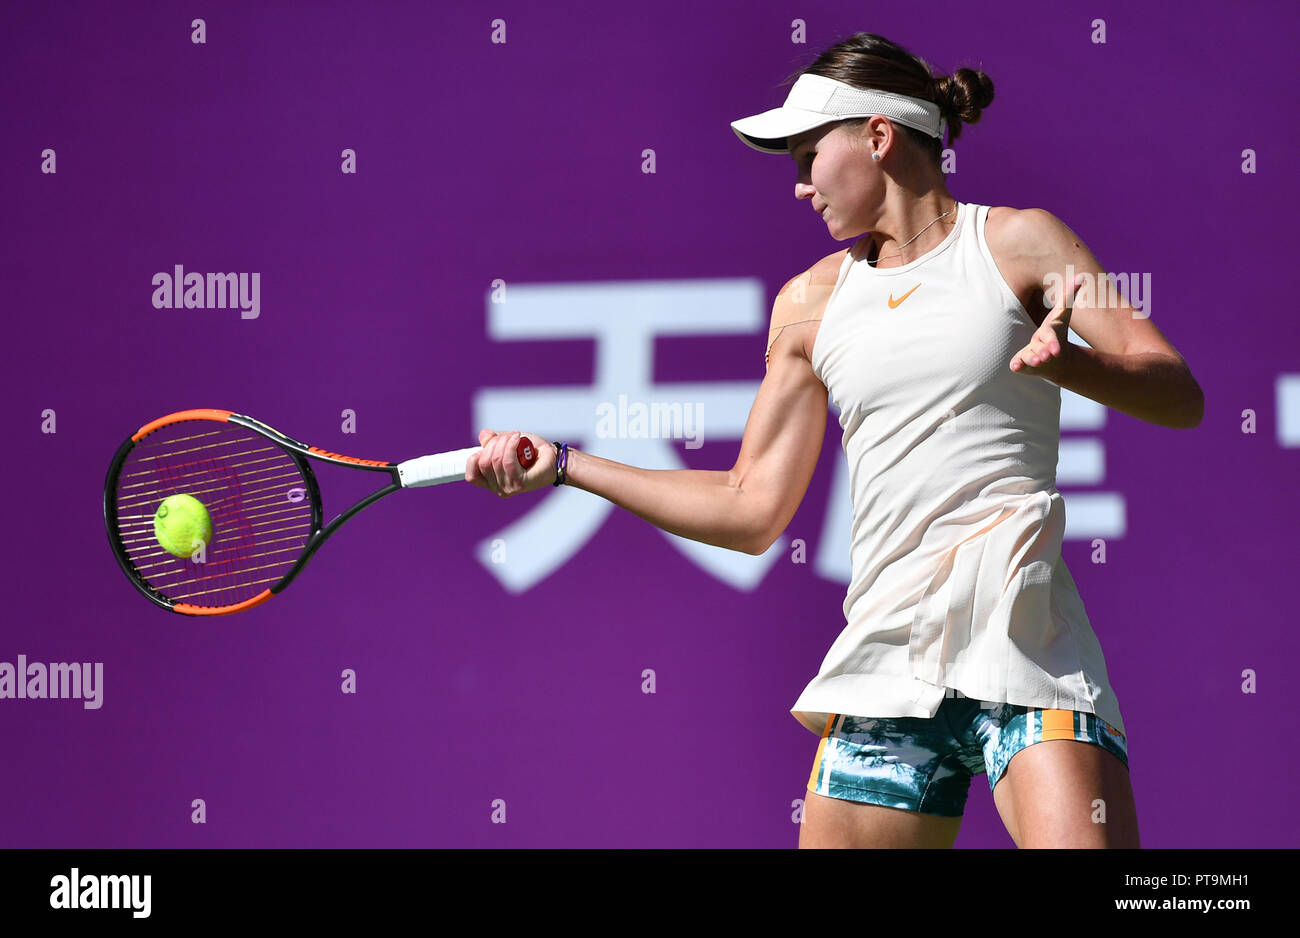 Tianjin, China. 8th Oct, 2018. Veronika Kudermetova of Russia competes  during the women's singles first round match against Alison Riske of the  United States at the WTA Tianjin Open tennis tournament in